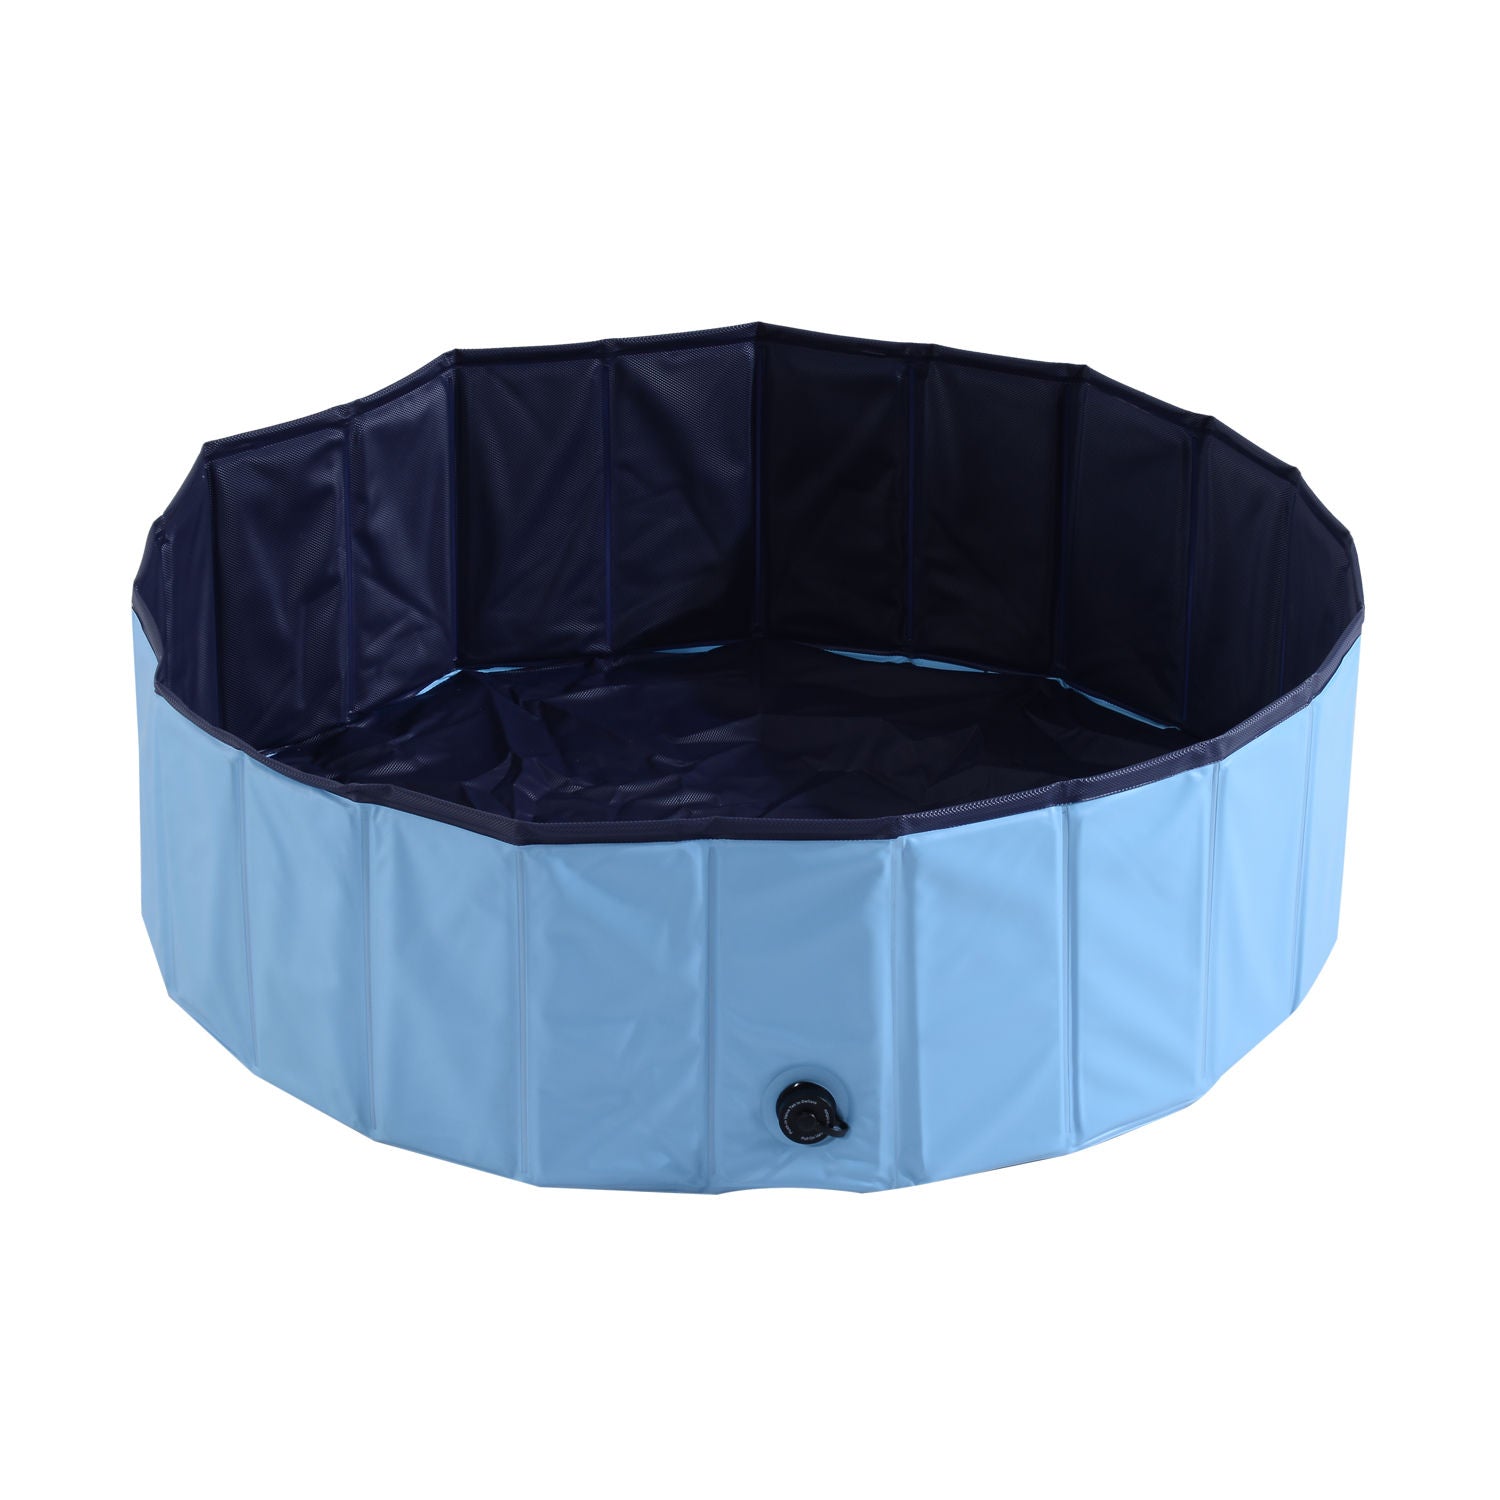 Nancy's Canal Bank Foldable Dog Pool, Dog Pool, Water Bowl for Dogs and Cats